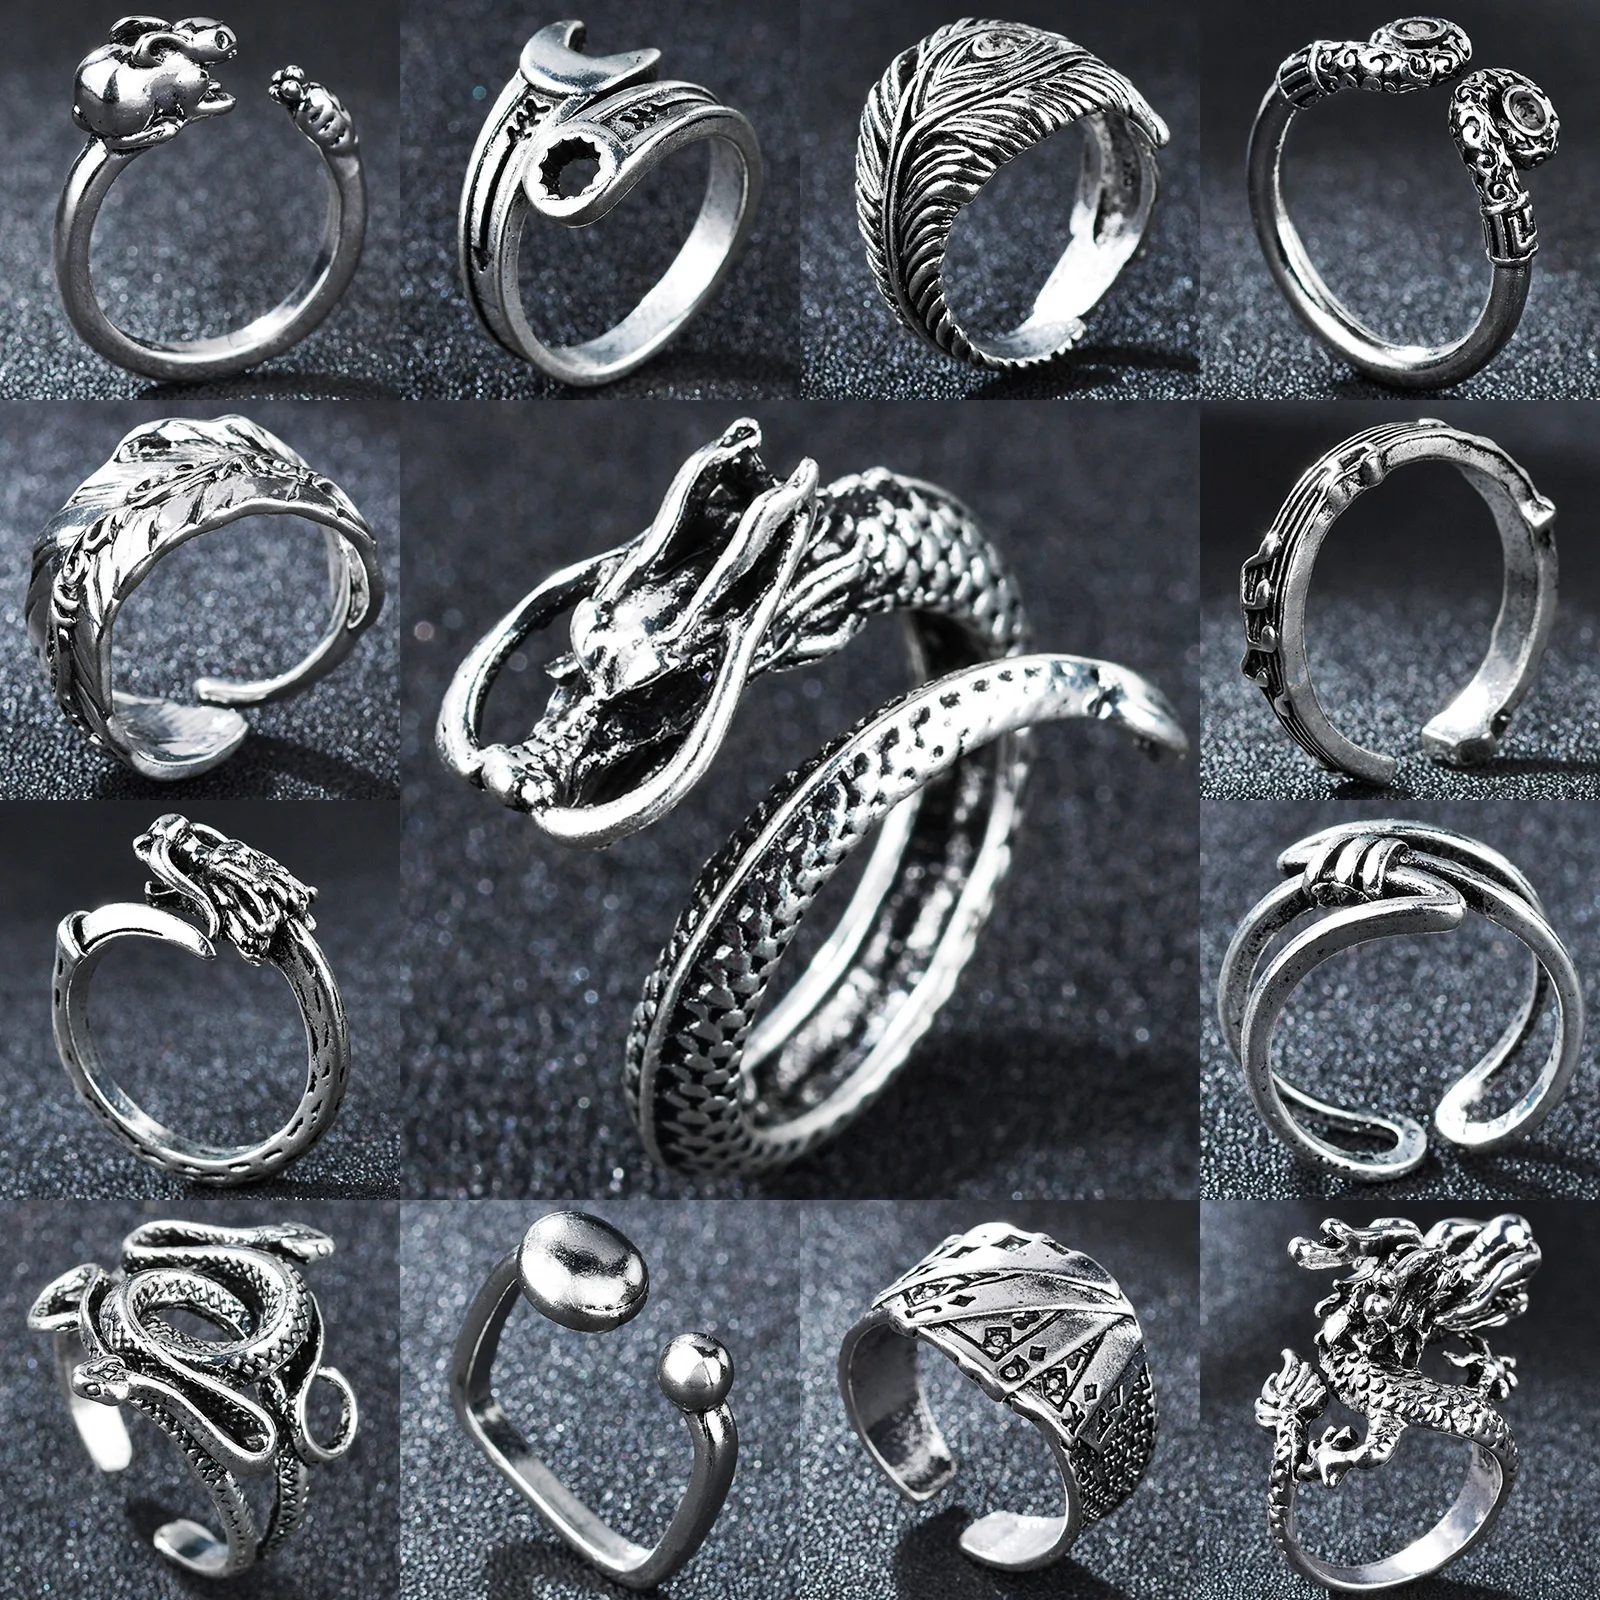 

30 Styles Vintage Silvery Punk Adjustable Dragon Rings For Men Women Biker Rock Opening Ring Gothic Cool Valentine's Day Jewerly